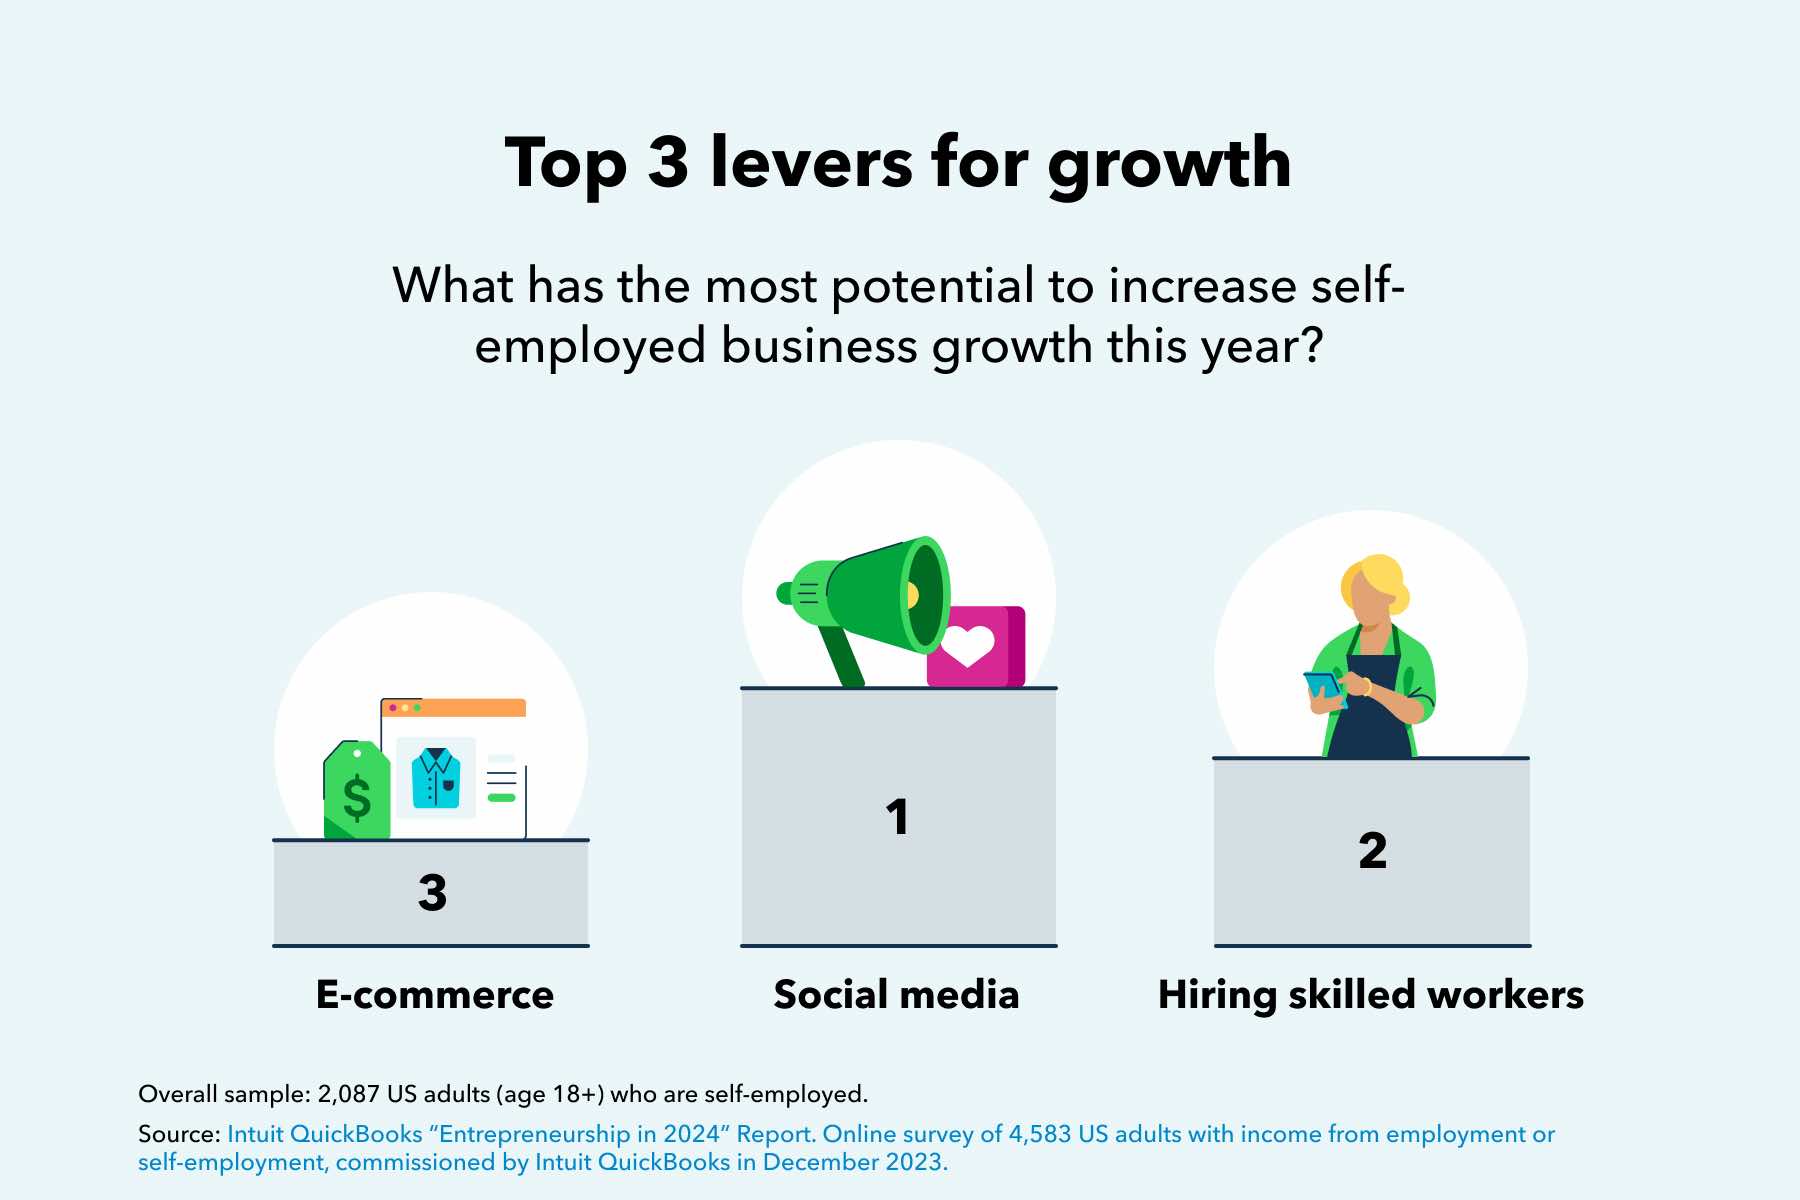 Top 3 levers for solopreneur growth: social media, hiring skilled workers, and e-commerce